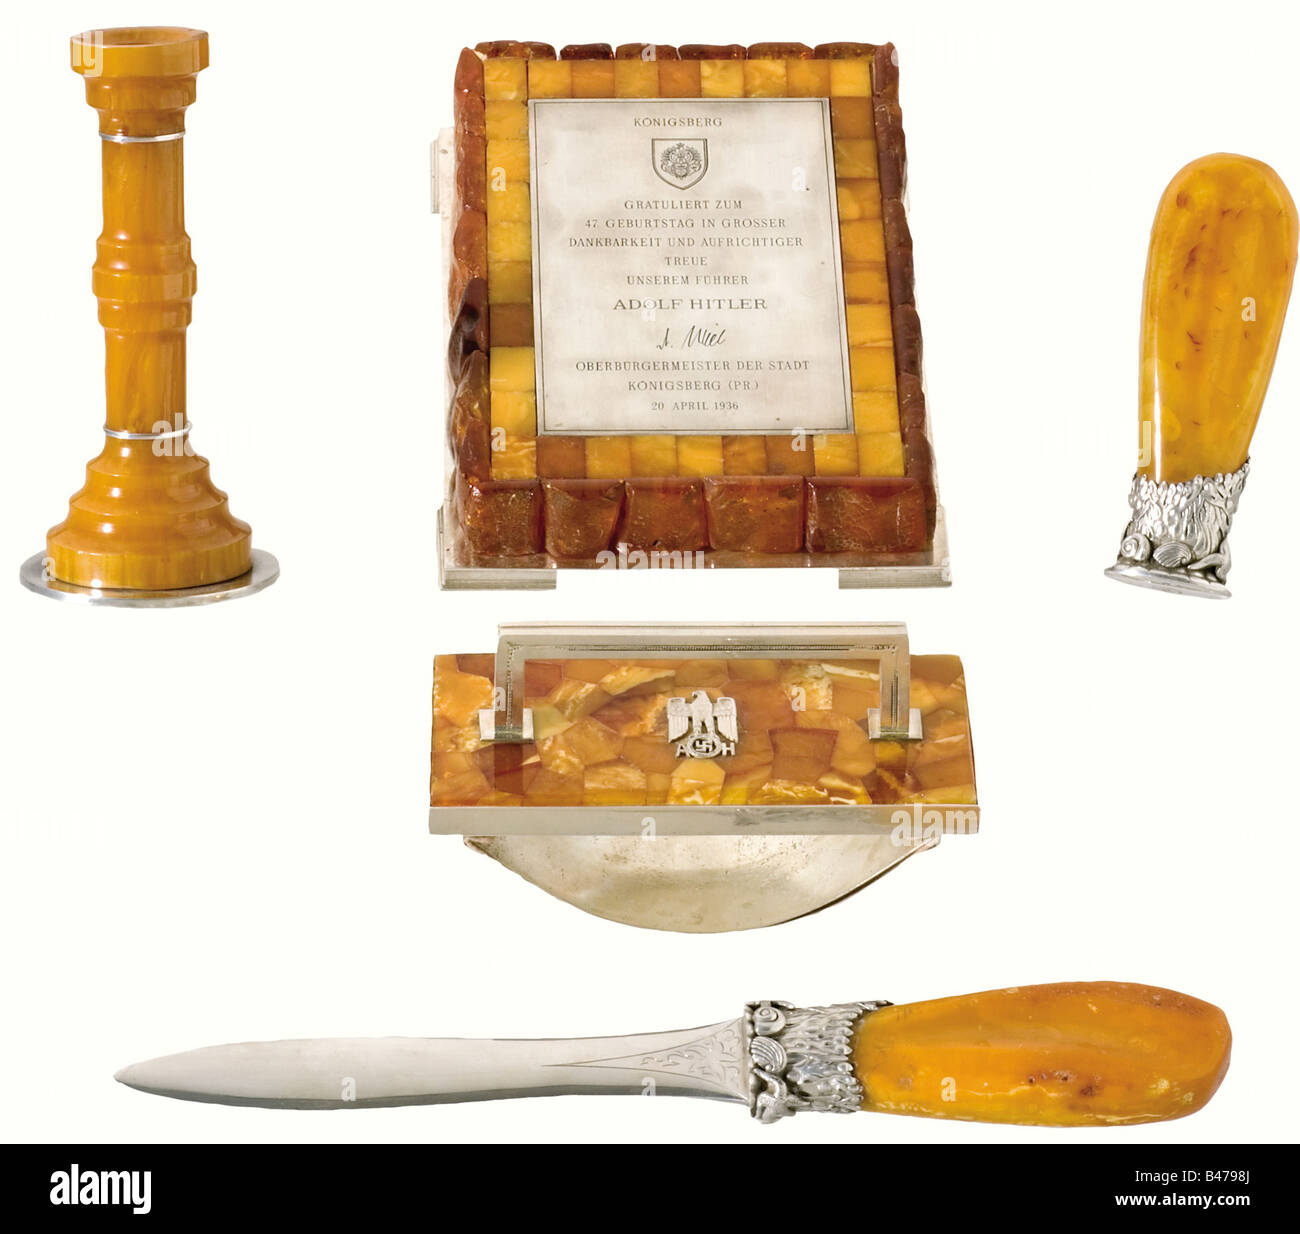 Adolf Hitler - an amber writing desk set., A gift from the City of Königsberg on Hitler's 47th Birthday on 20 April 1936. Silver, amber, and wood, with a silver-plated figure of Atlas. The individual pieces composing the set are: a) a large paperweight with an engraved silver dedication plaque, "Königsberg gratuliert zum 47. Geburtstag in grosser Dankbarkeit und aufrichtiger Treue unserem Führer Adolf Hitler - H. Mill - Oberbürgermeister der Stadt Königsberg (Pr.) 20. April 1936". (Königsberg congratulates our Führer Adolf Hitler on his 47th Birthday in Sincere, Stock Photo